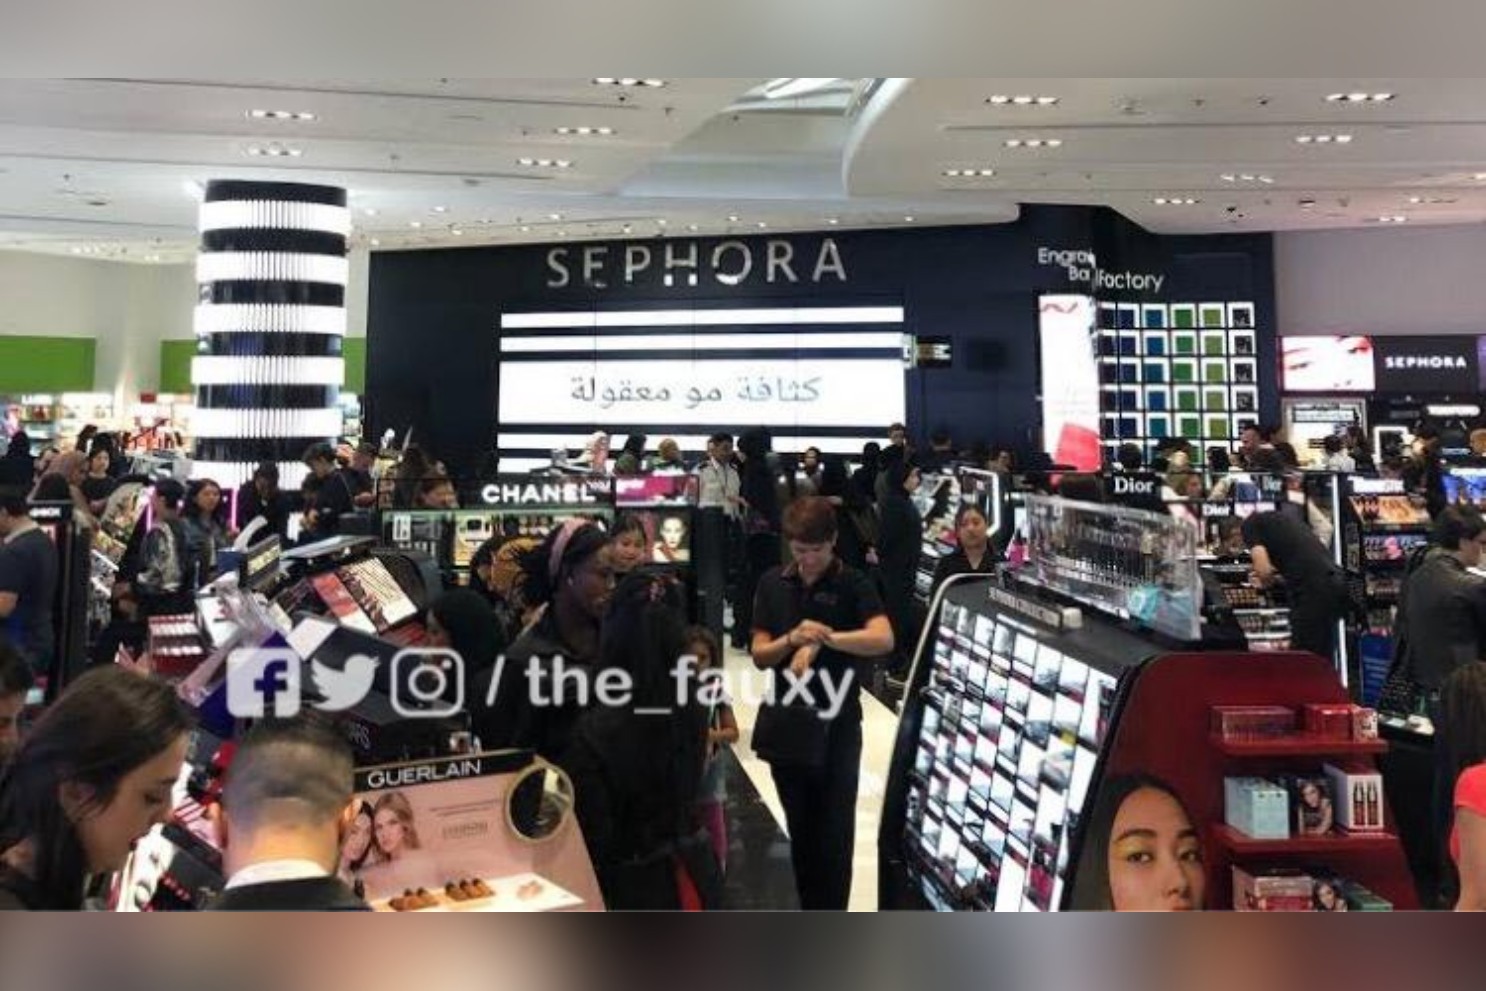 People gathered for anti-racism protest loot a makeup store